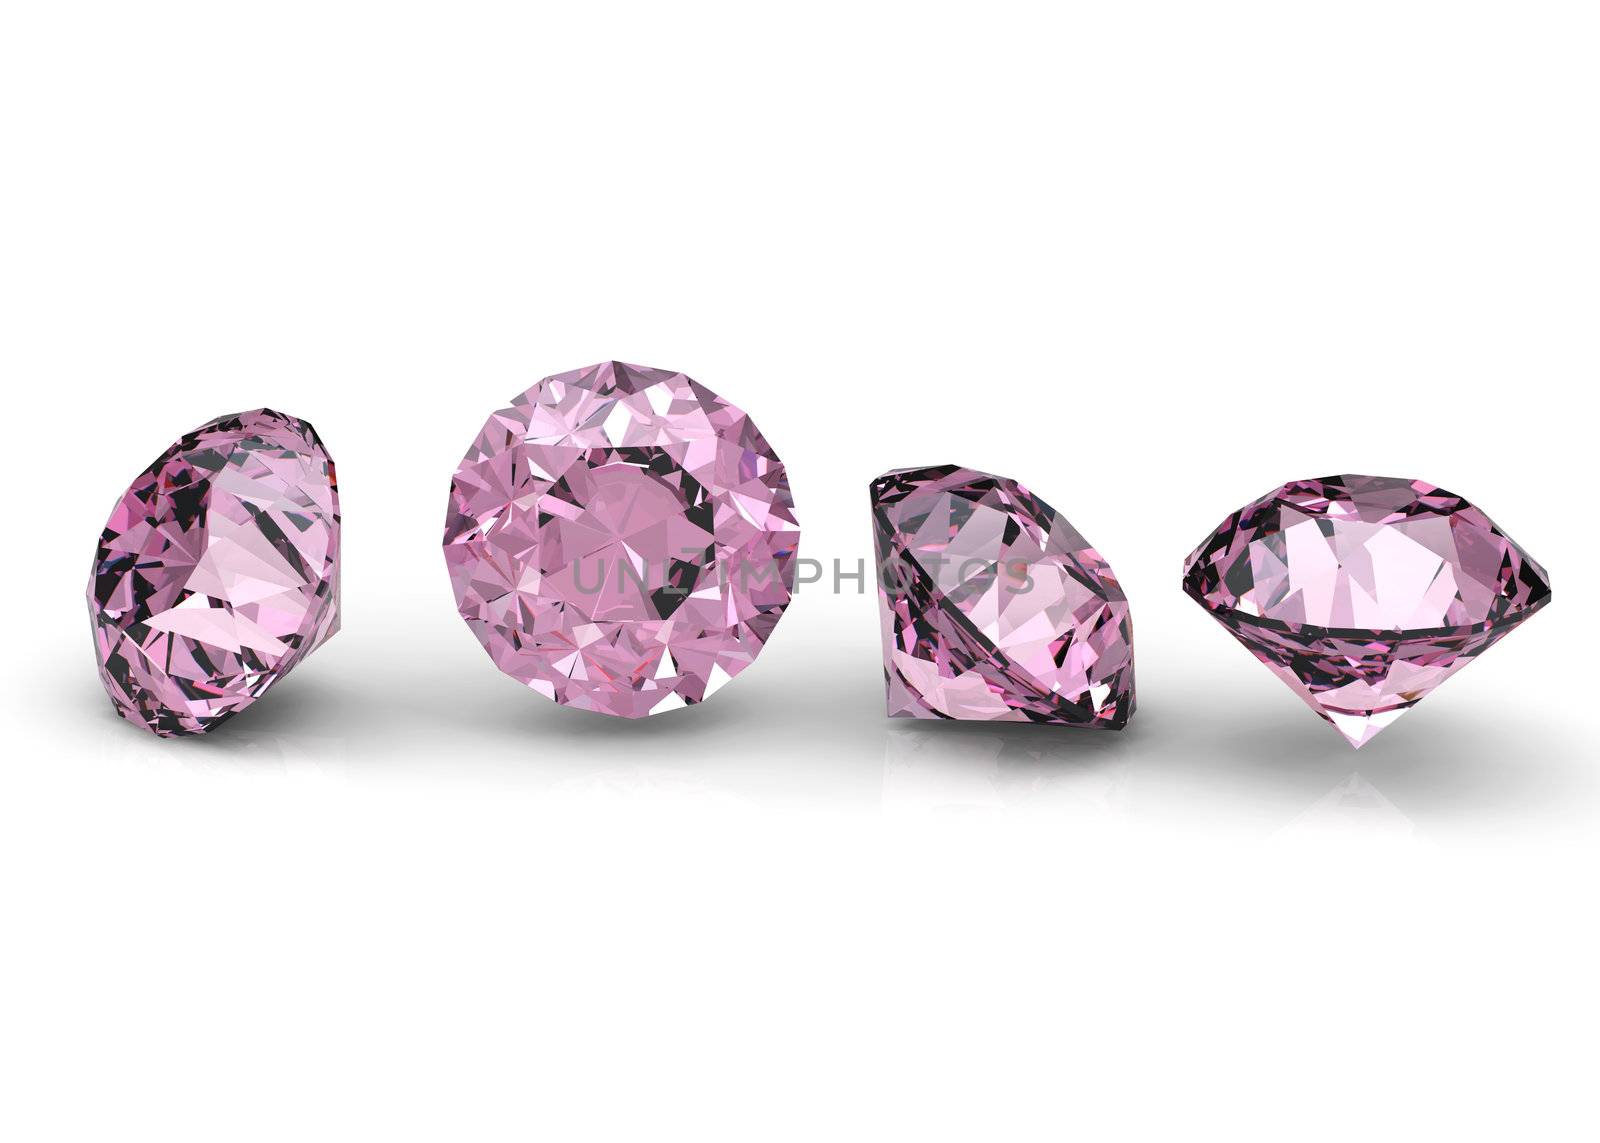 Collection of round pink diamond  isolated on white background 